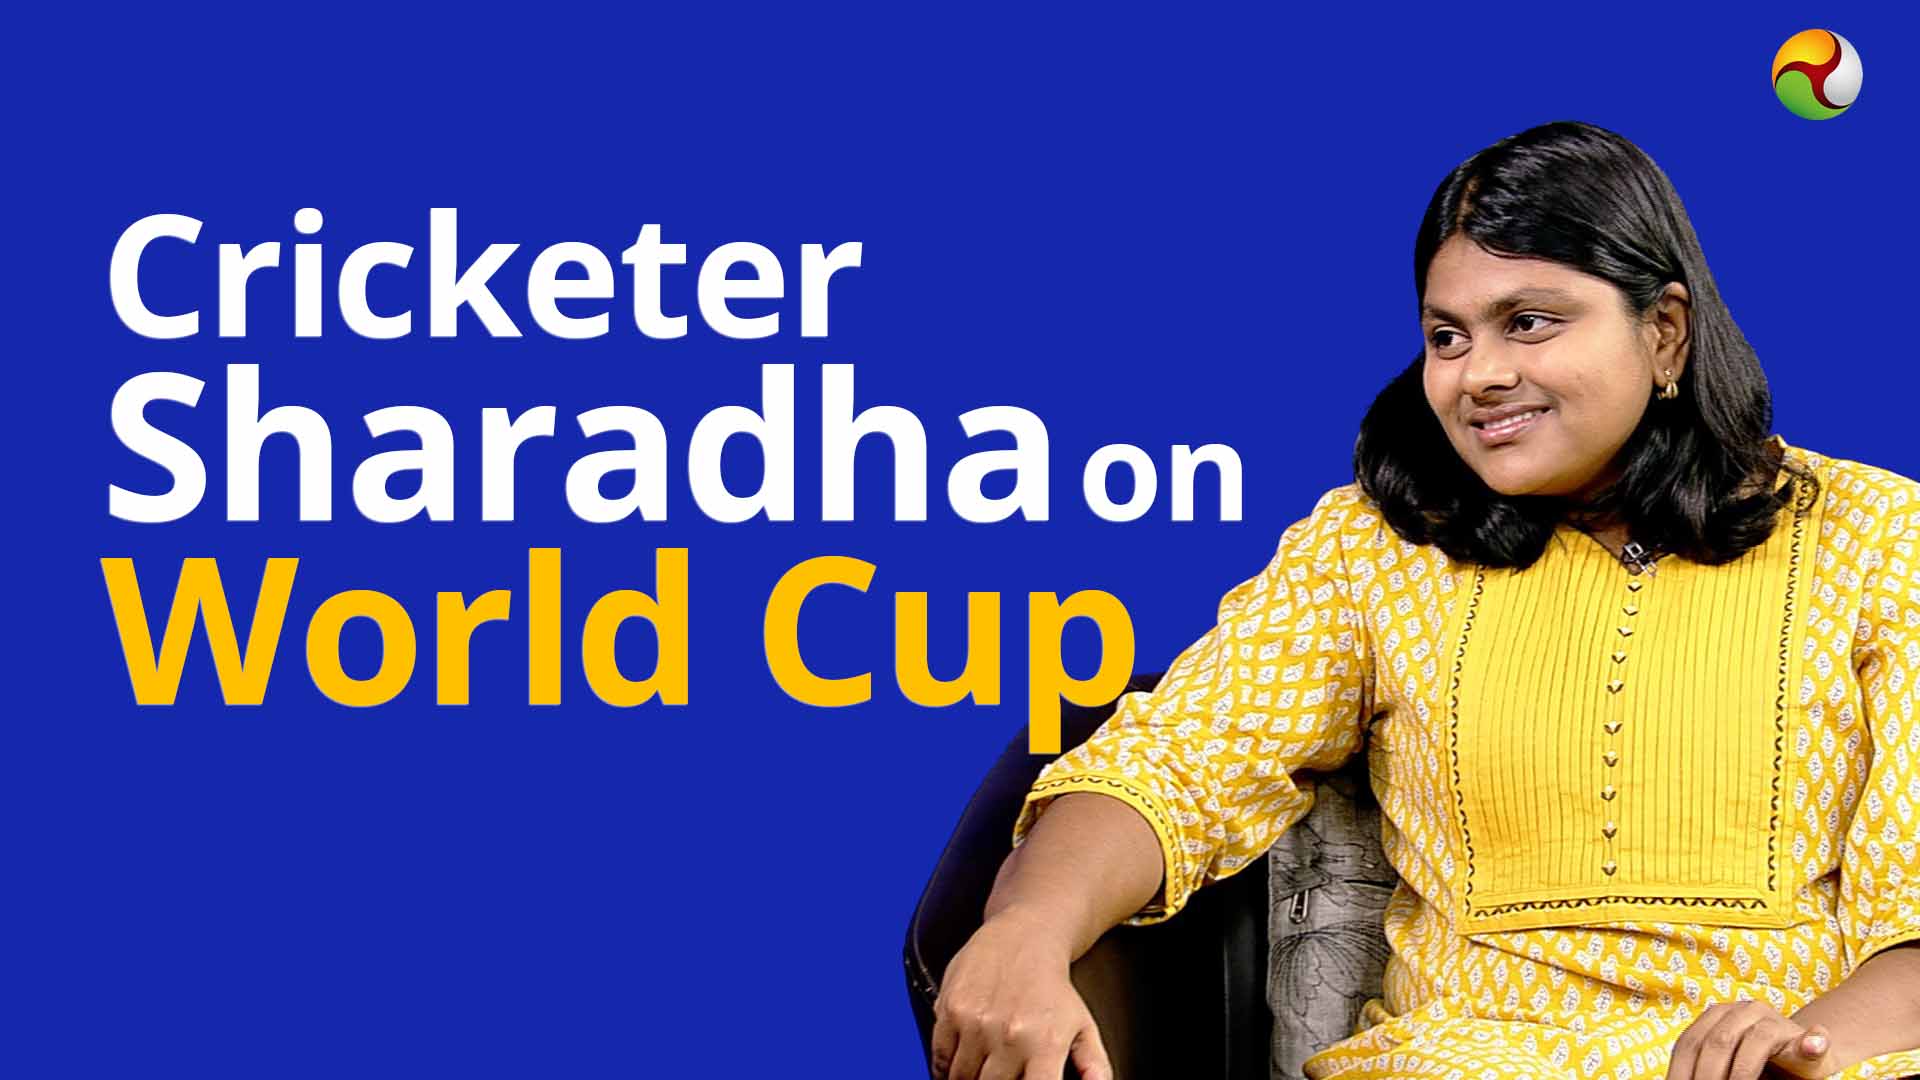 Cricketer Sharadha on the World Cup